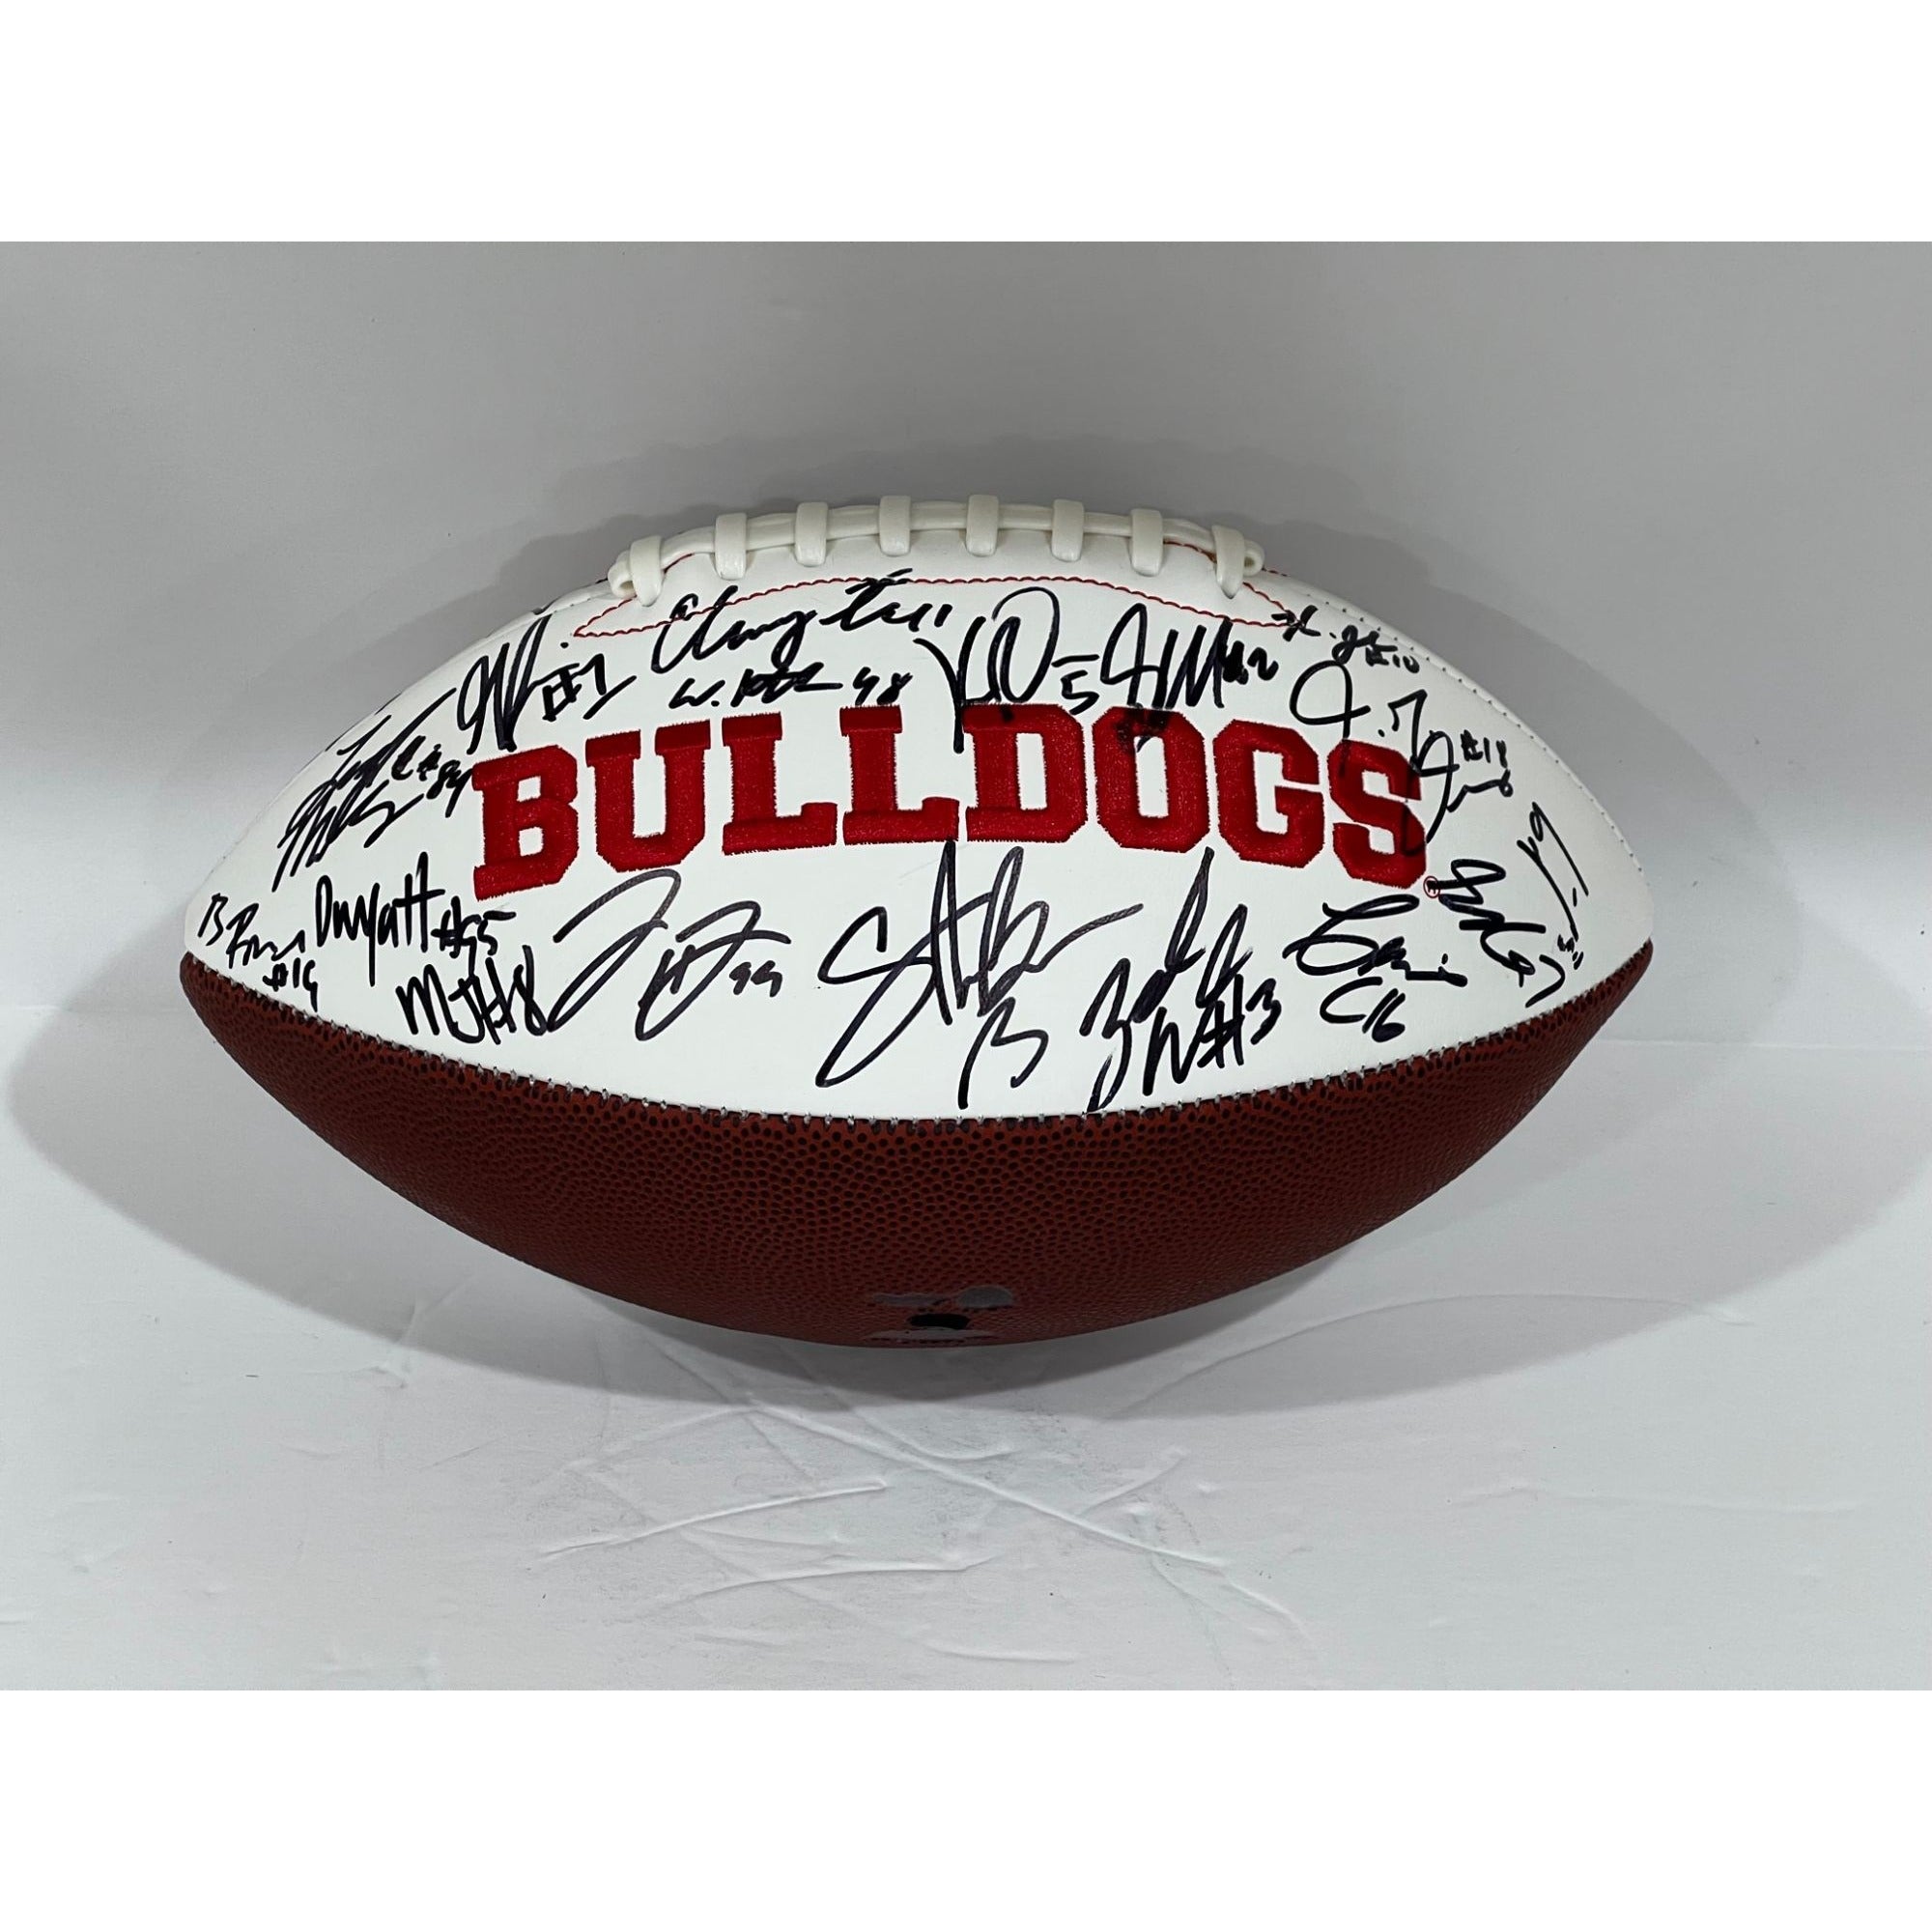 Georgia Bulldogs 2021-22 national champions Stetson Bennett, Kirby Smart, Brock Bowers team signed football with proof with free case